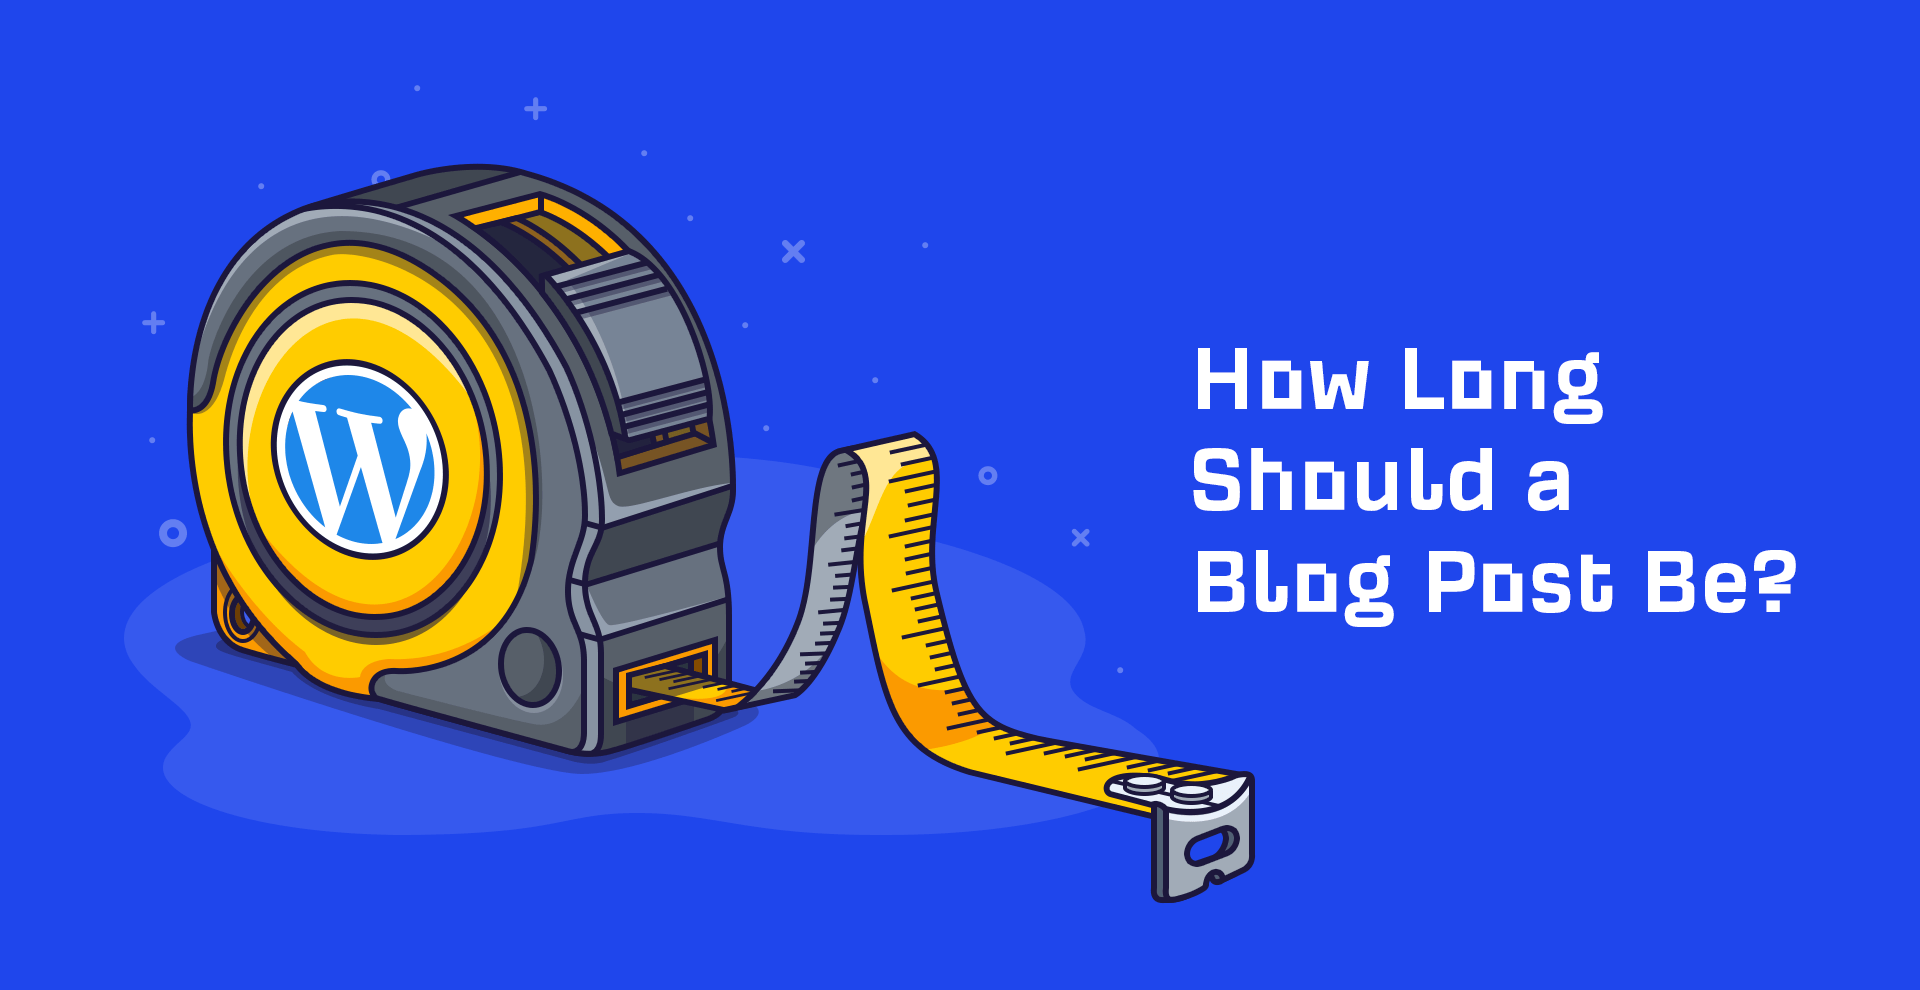 How Long Should Blog Posts Be? [The Real Answer]